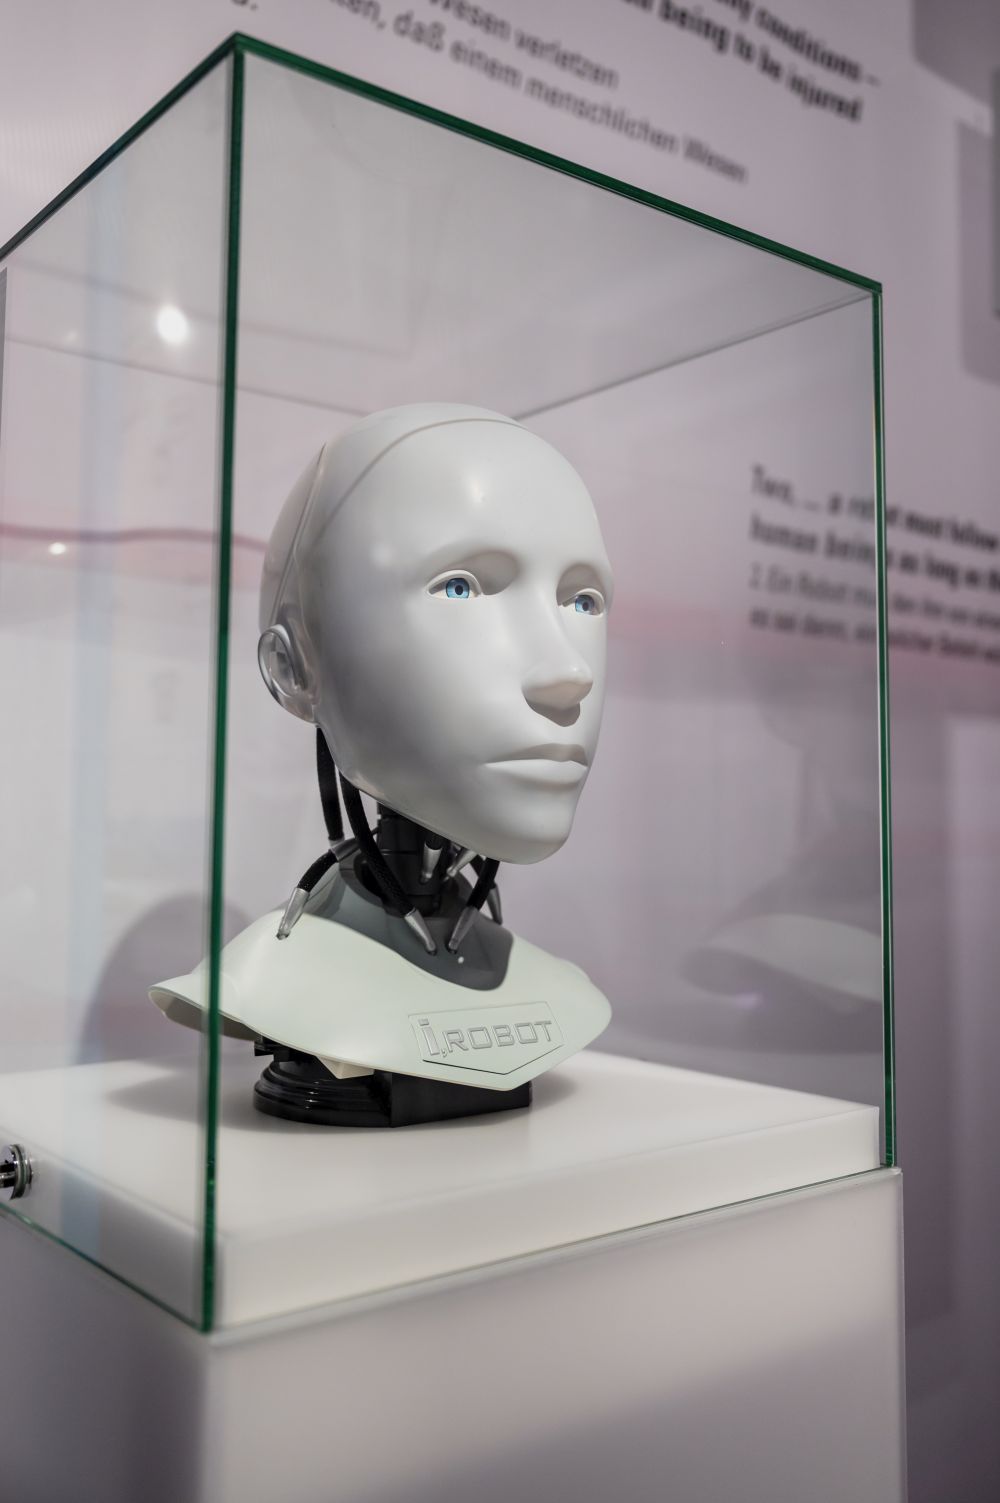 Bust of a white human-like robot in a display case